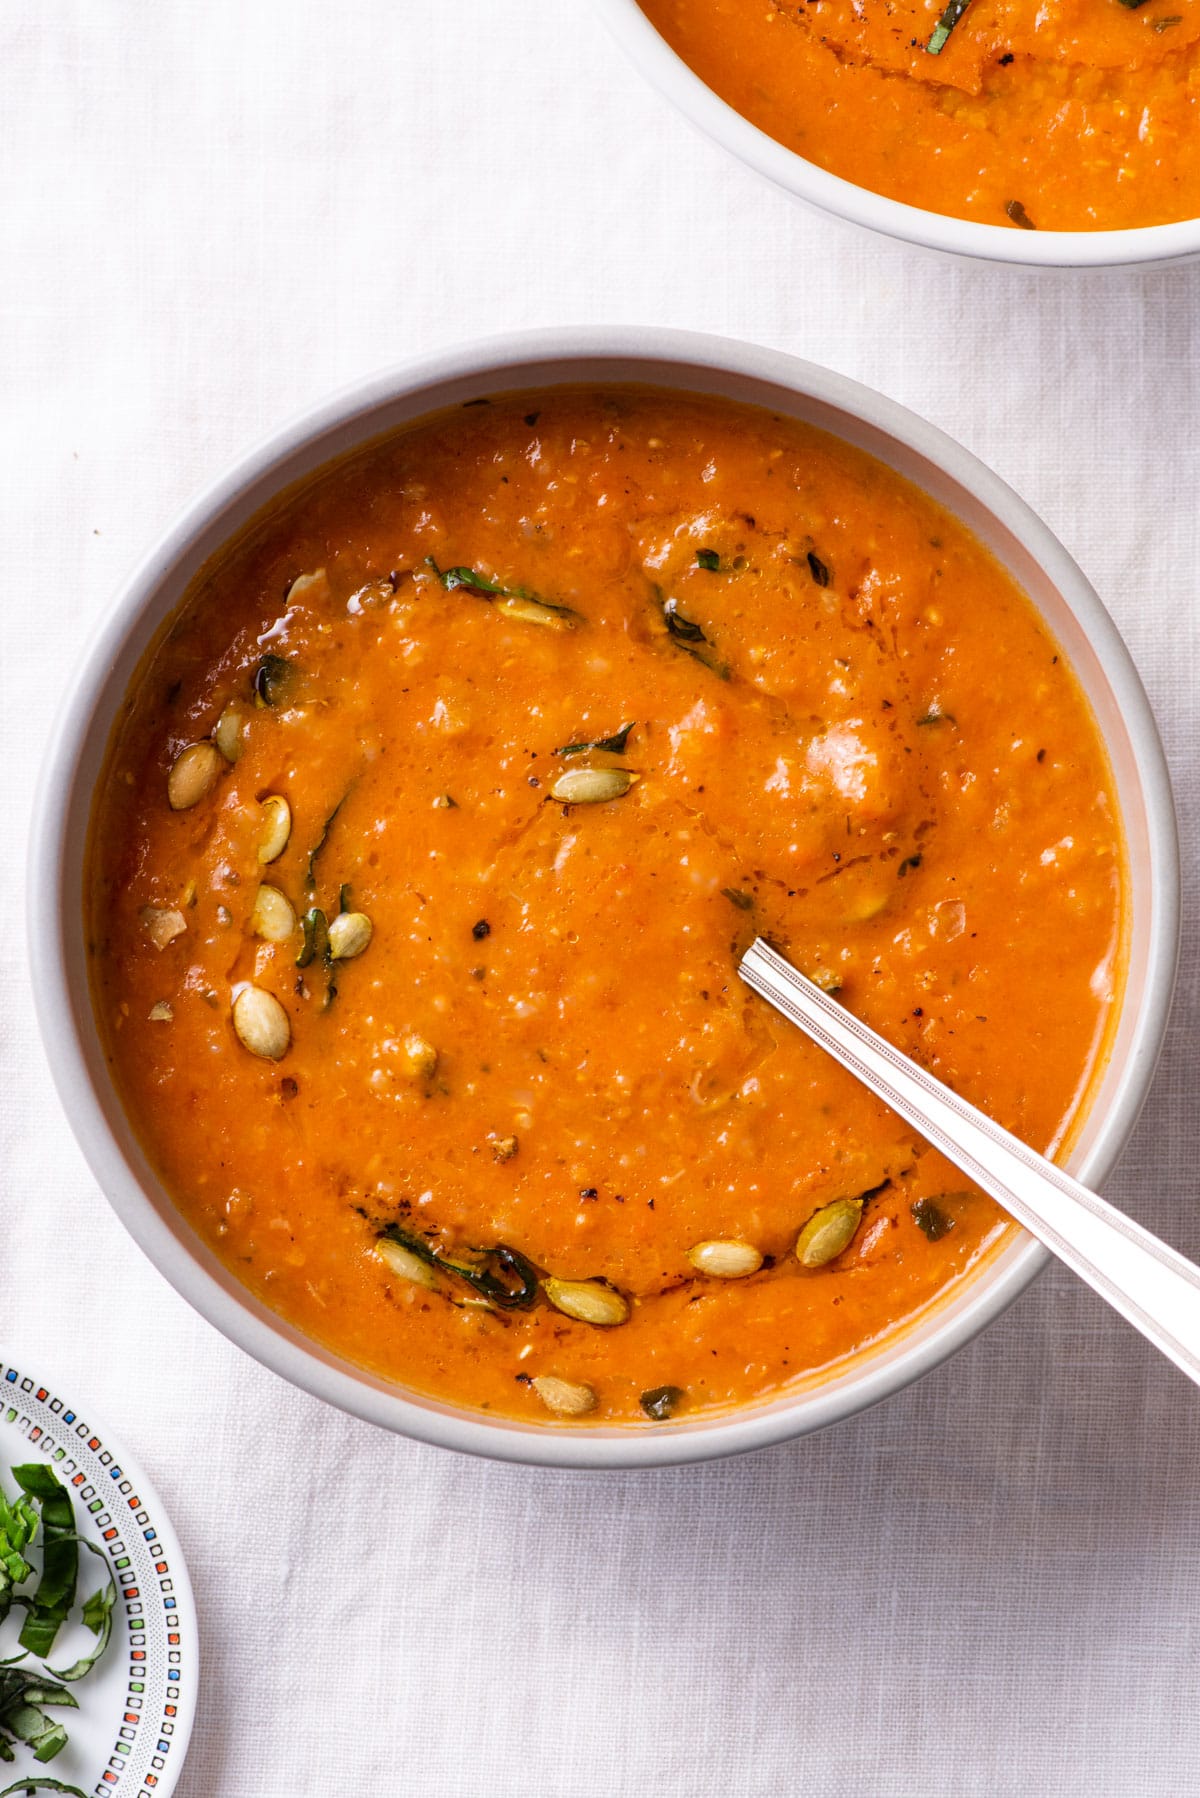 Creamy tomato soup garnished with pumpkin seeds and basil.